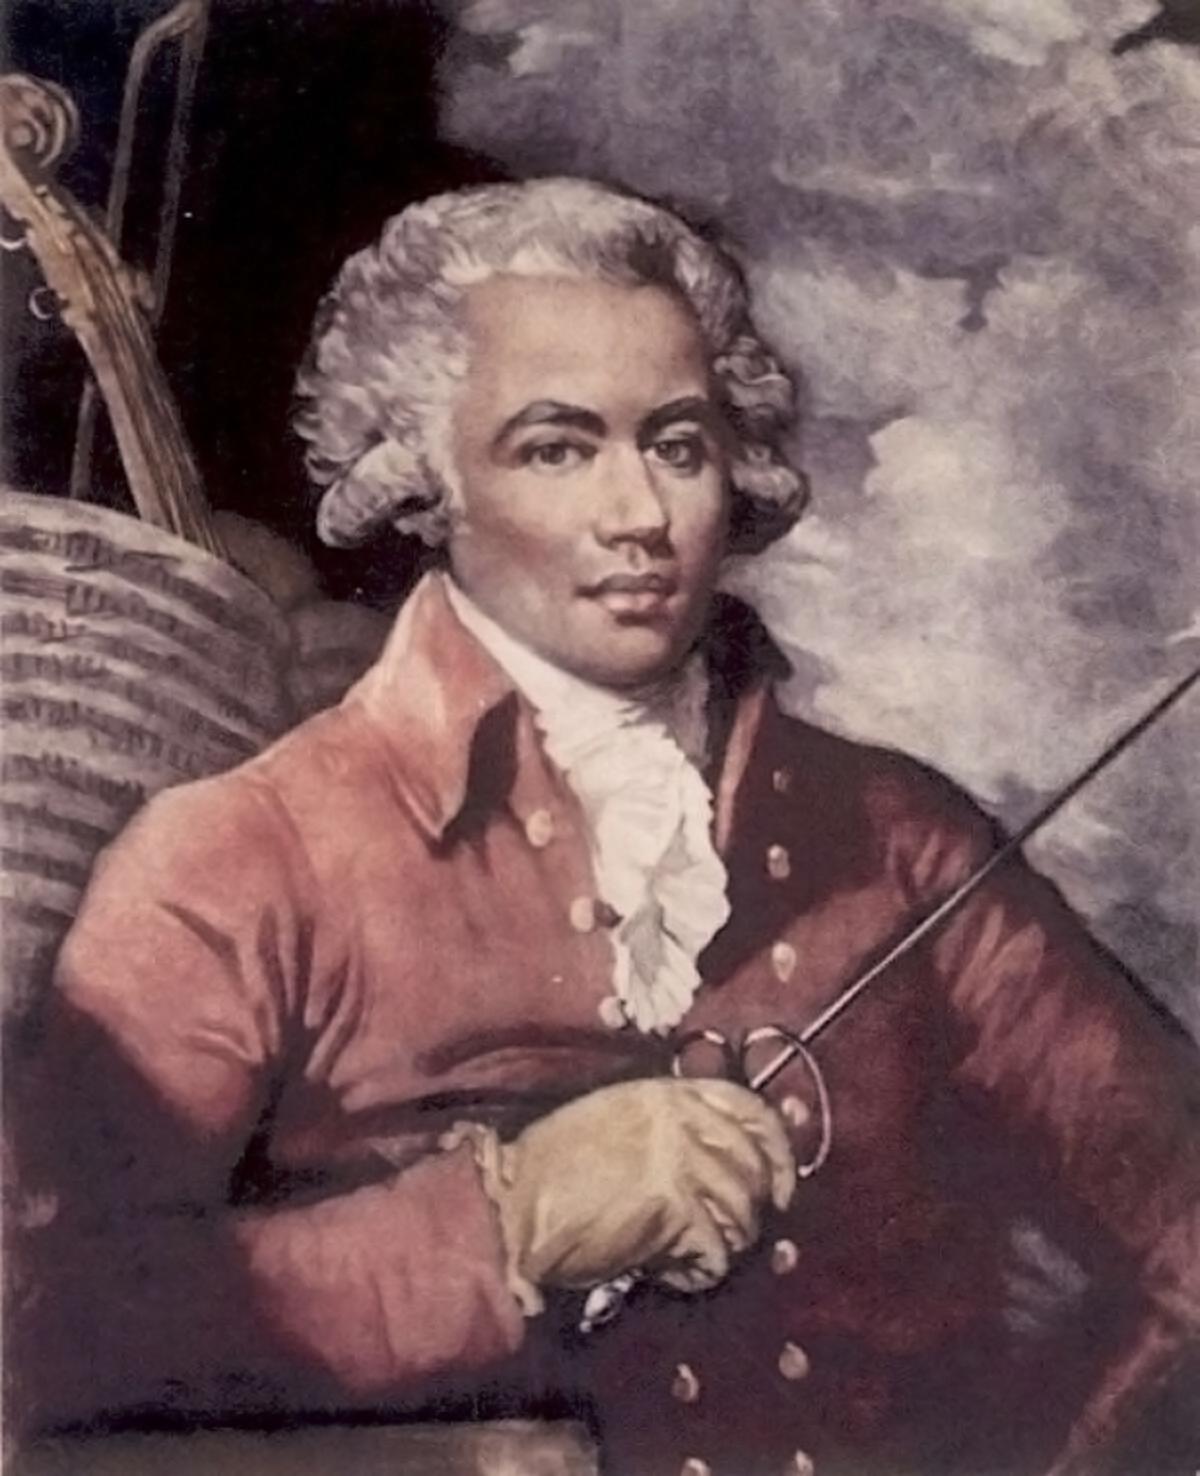 Victorian-era painting of a man in a powdered wig holding a small rapier